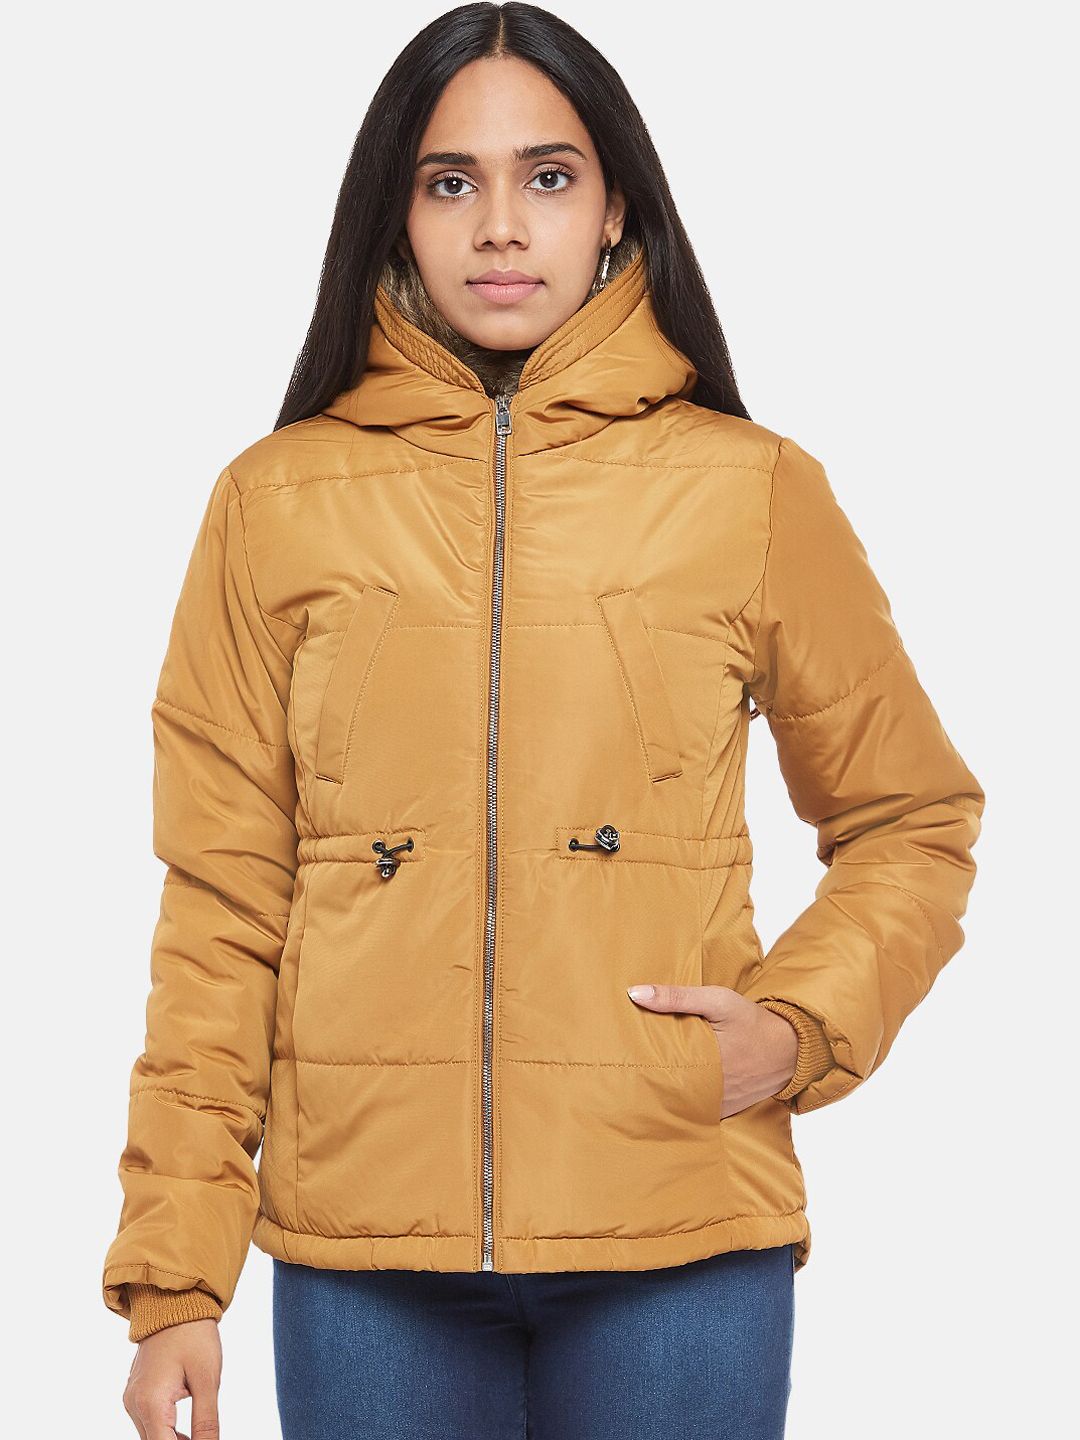 People Women Mustard Yellow Open Front Jacket Price in India